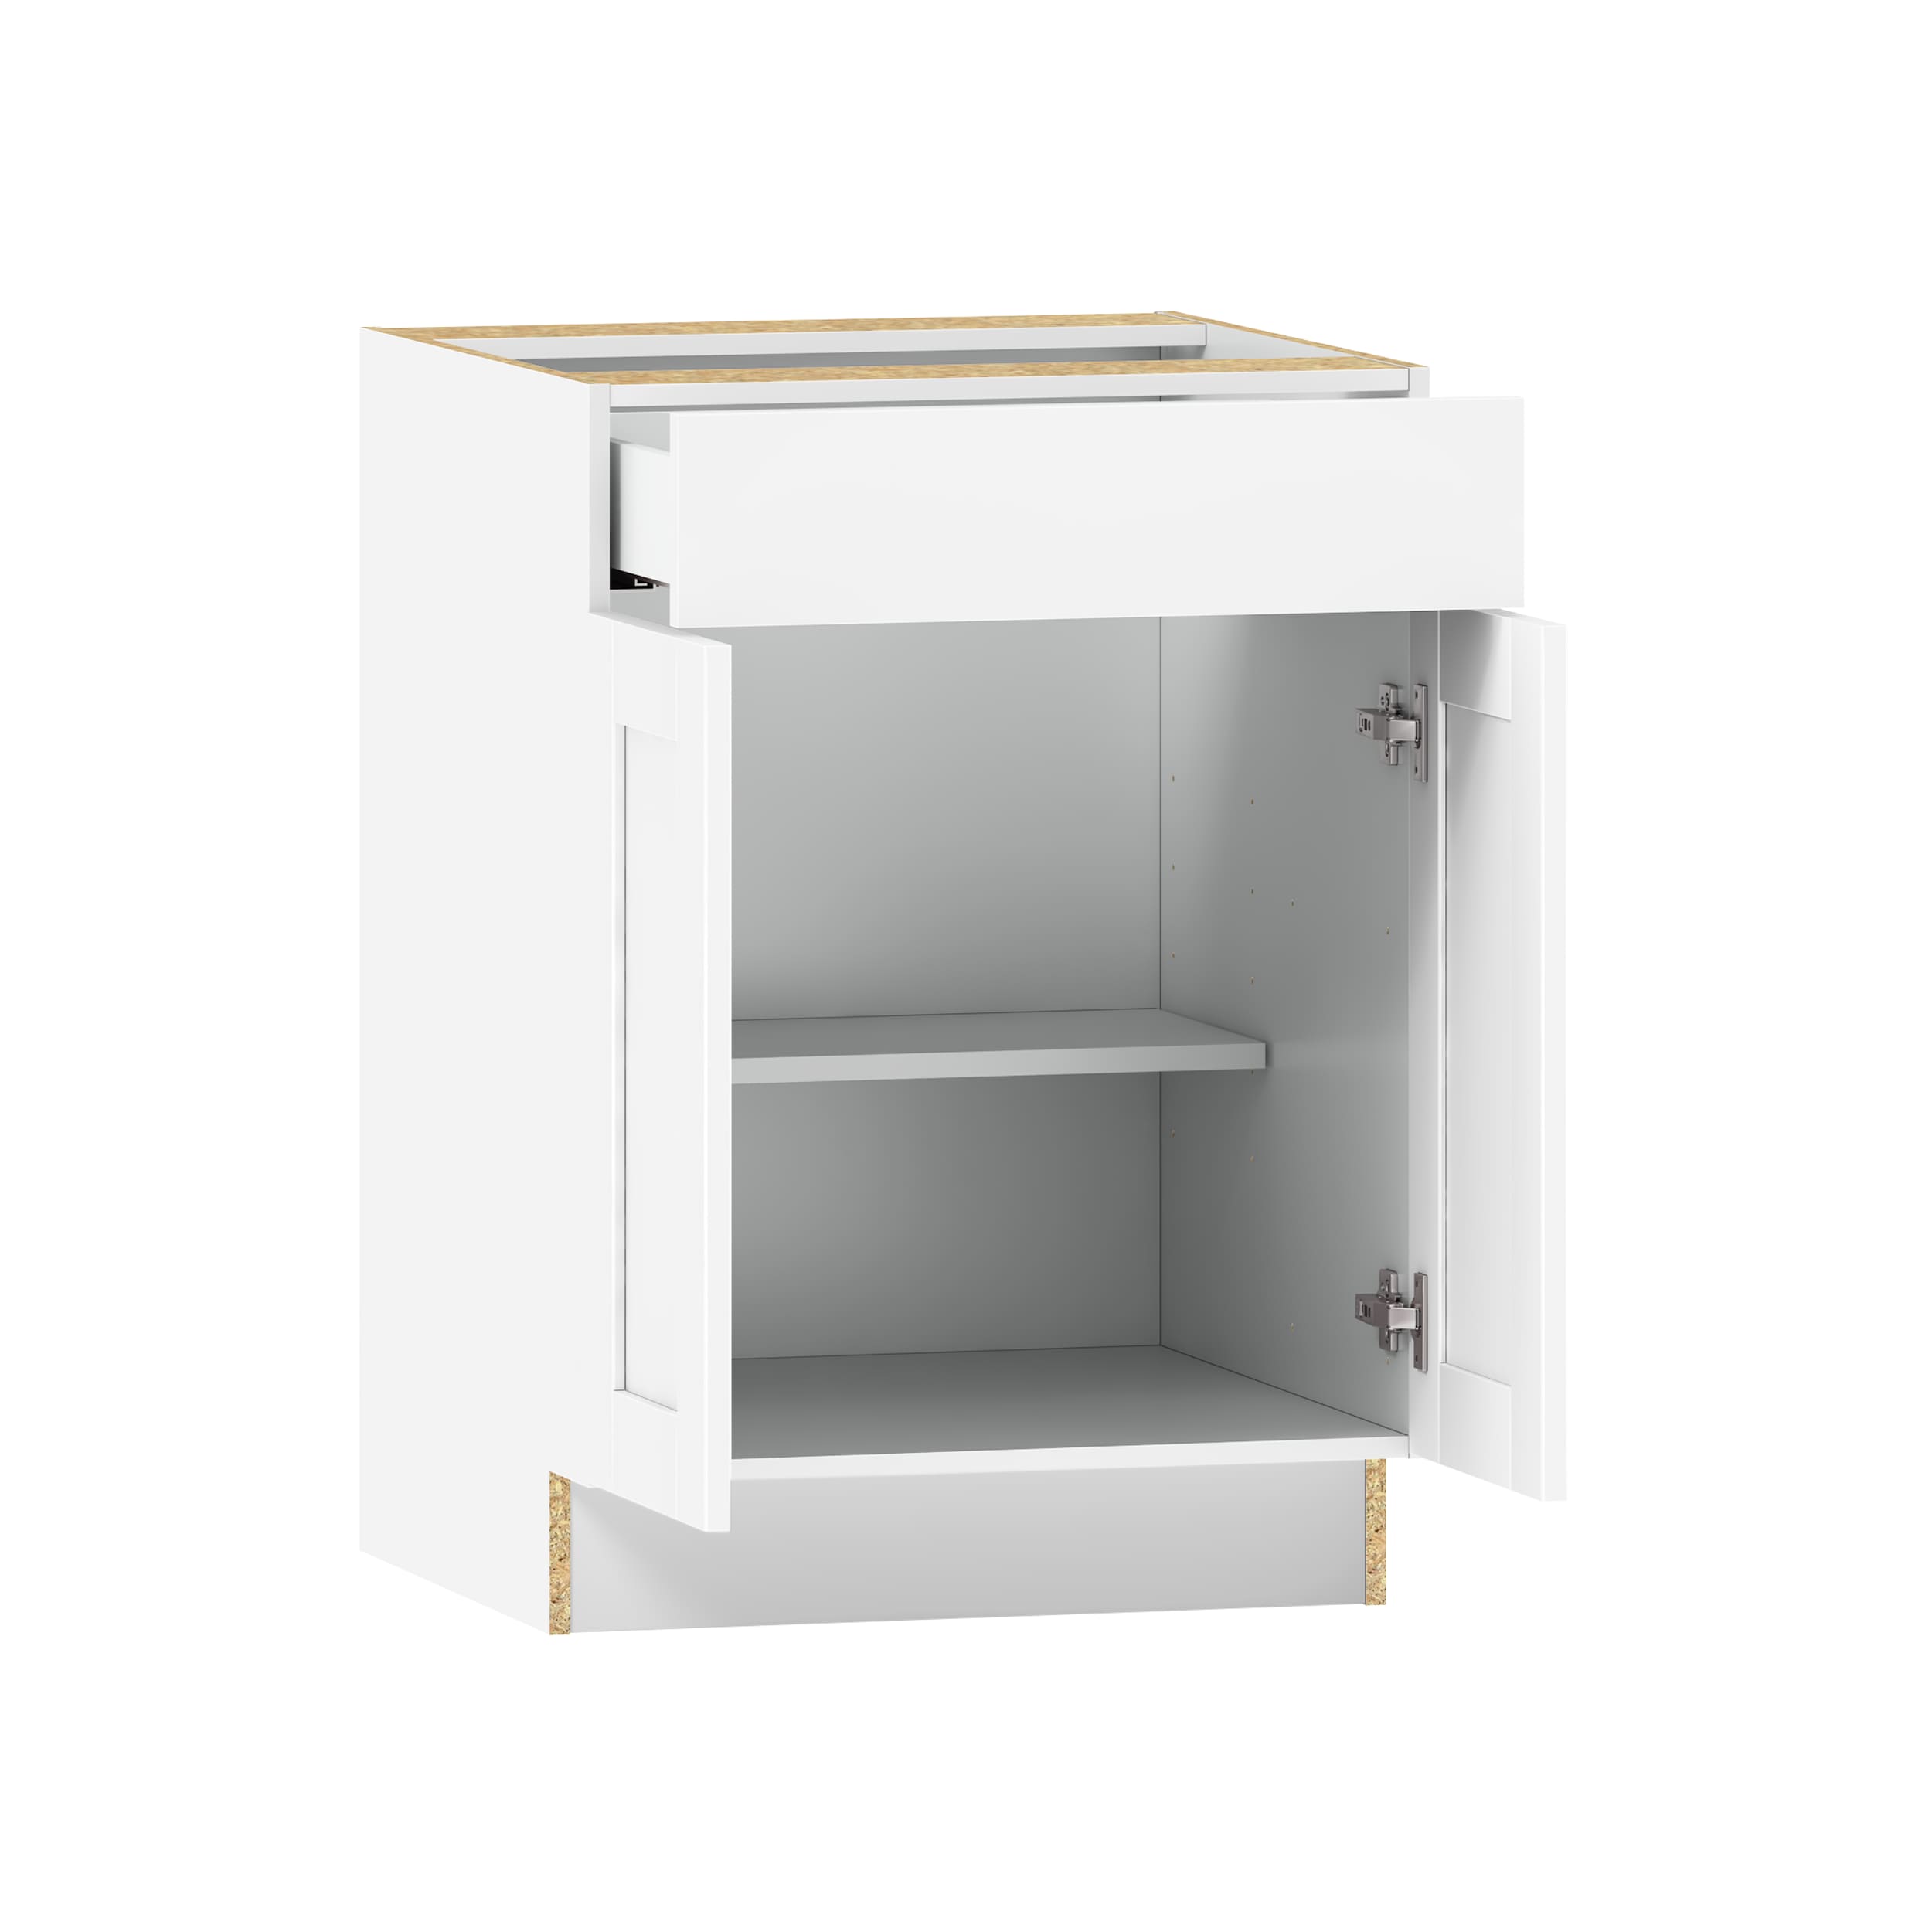 Hugo&Borg Canora 24-in W x 34.5-in H x 24.75-in D Canora White Door and ...